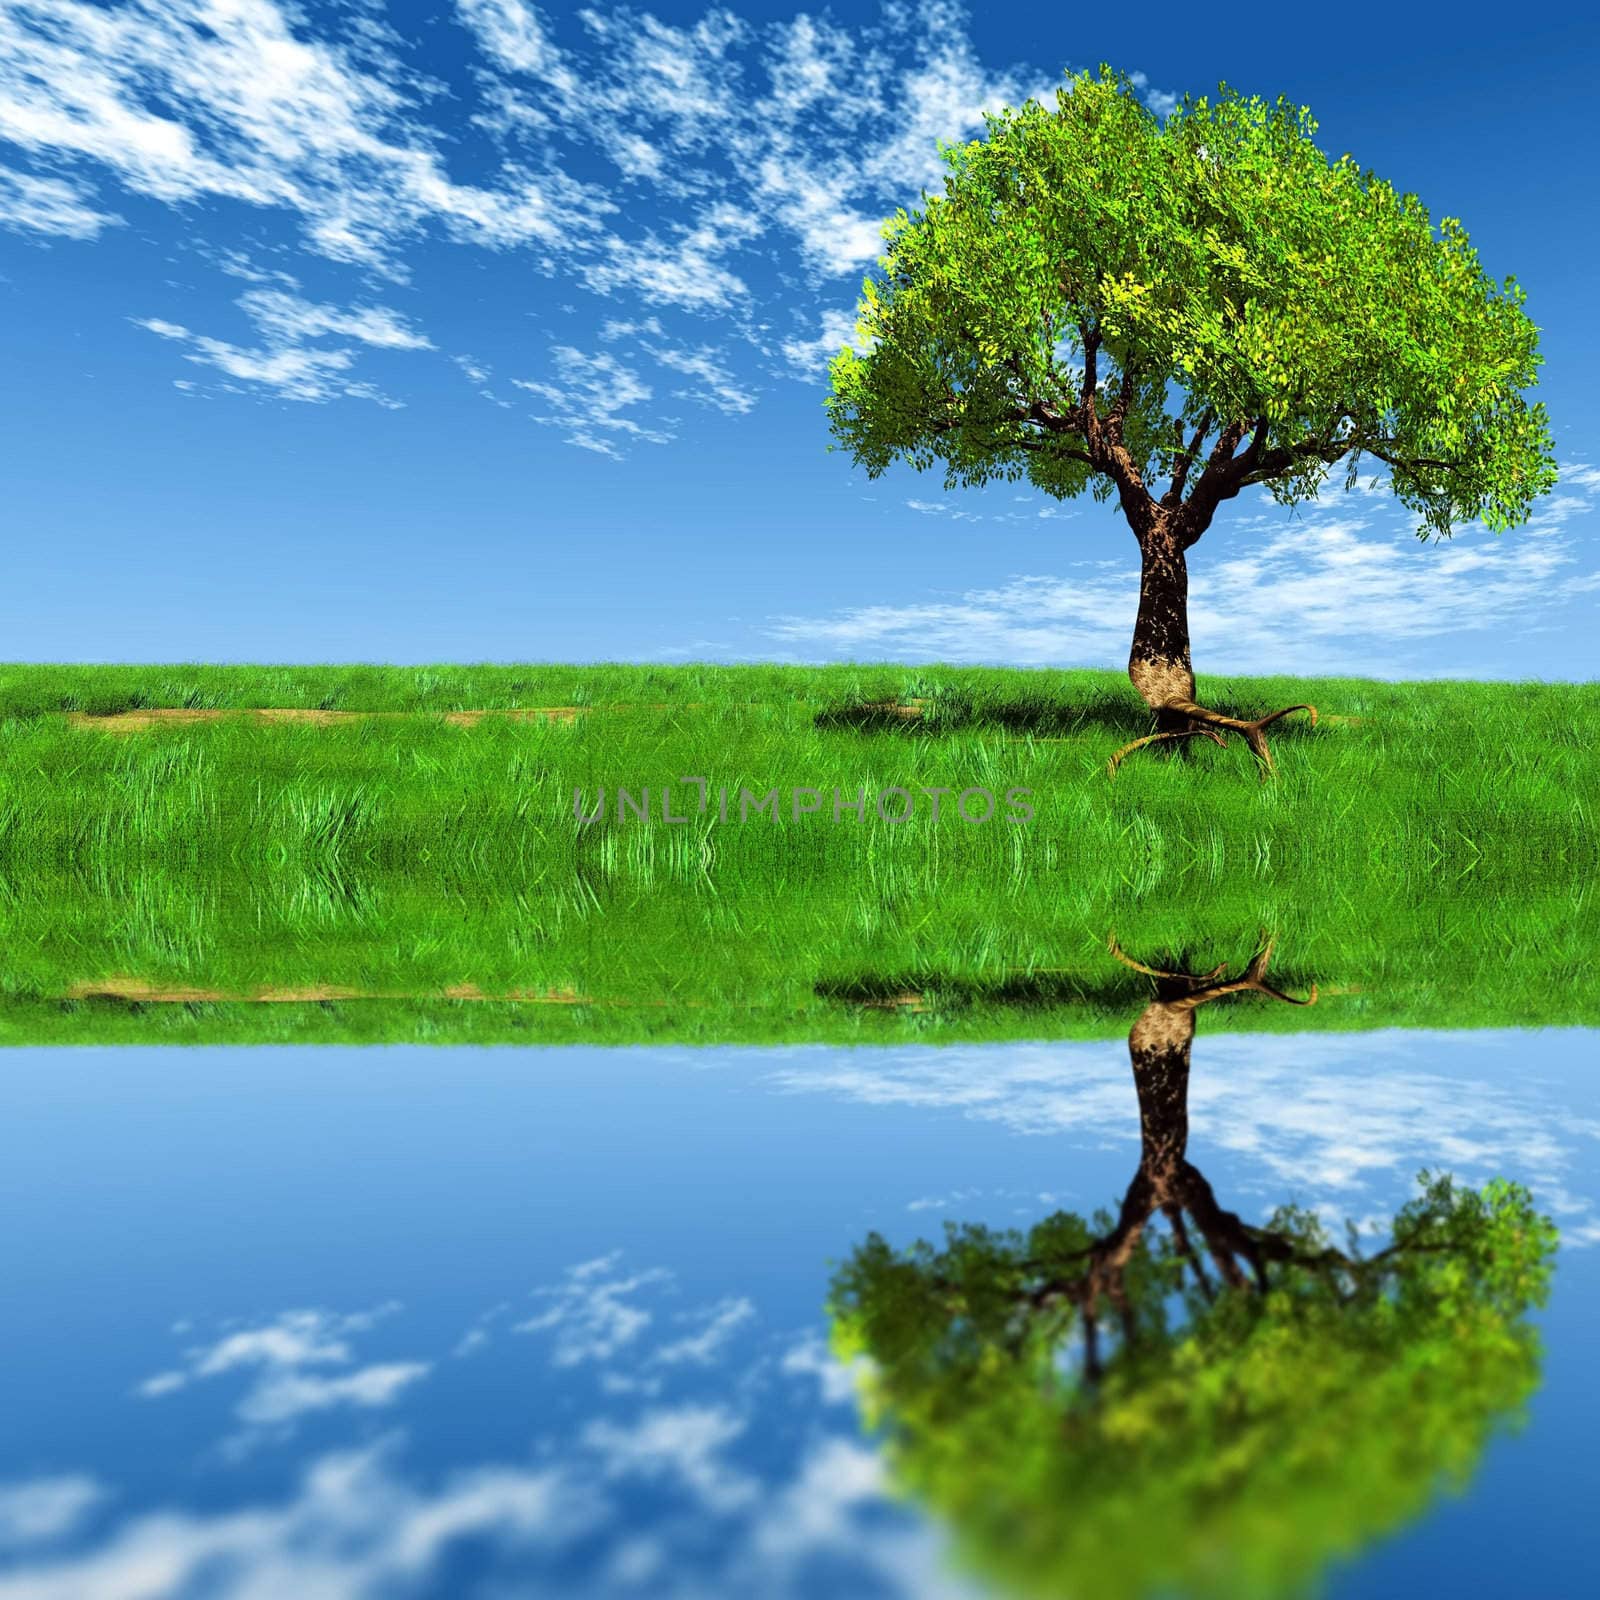 the tree, the meadow and water by njaj